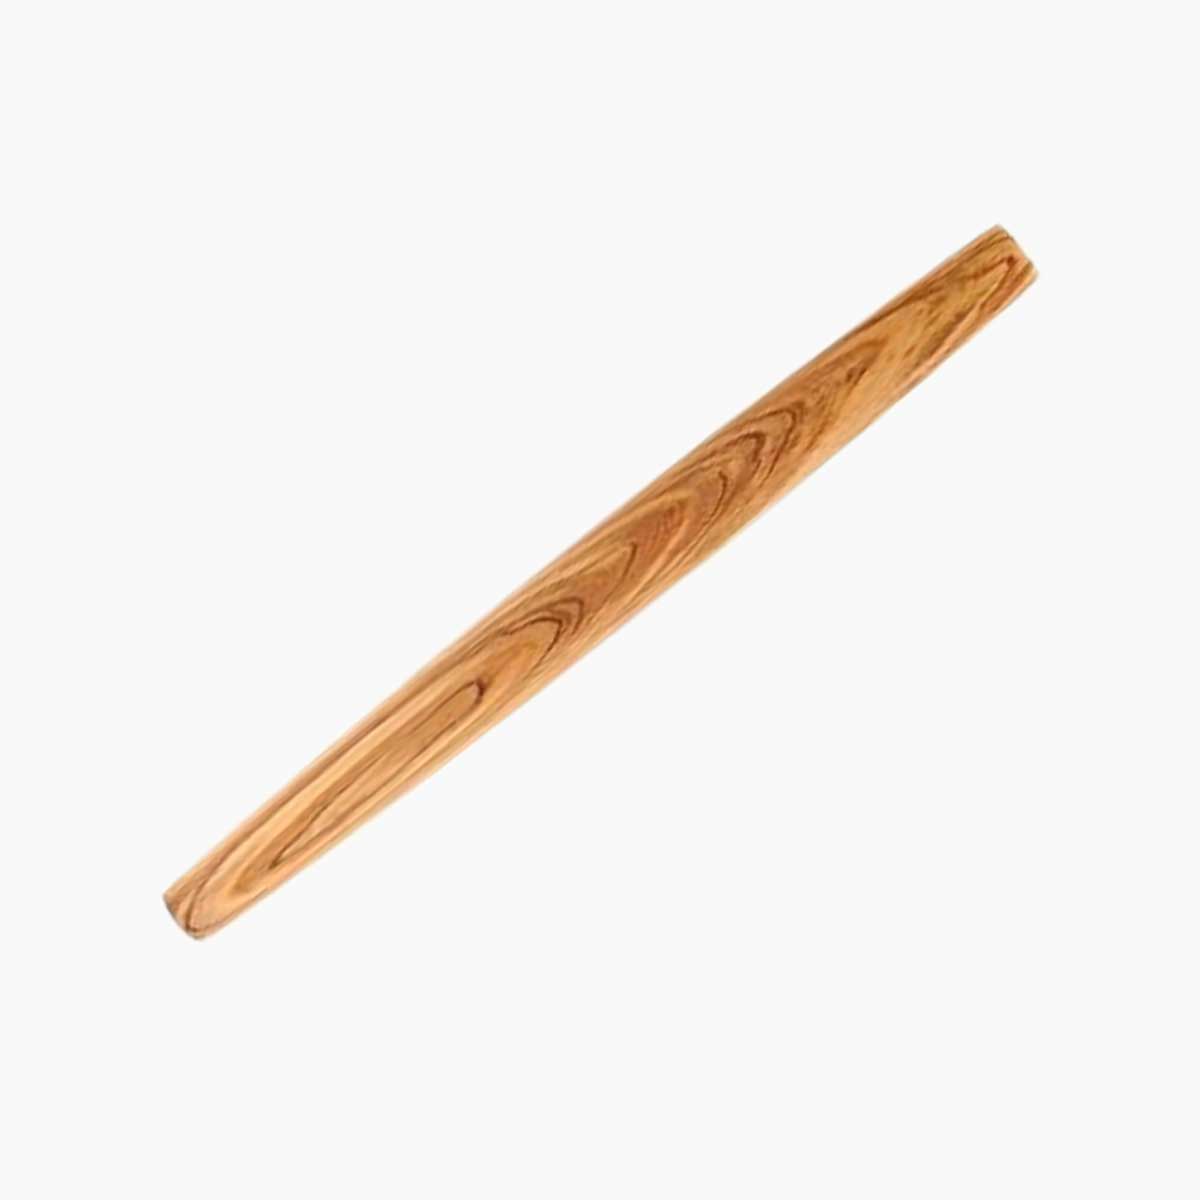 A French wooden rolling pin, which is one of the pasta queen's favorite things.